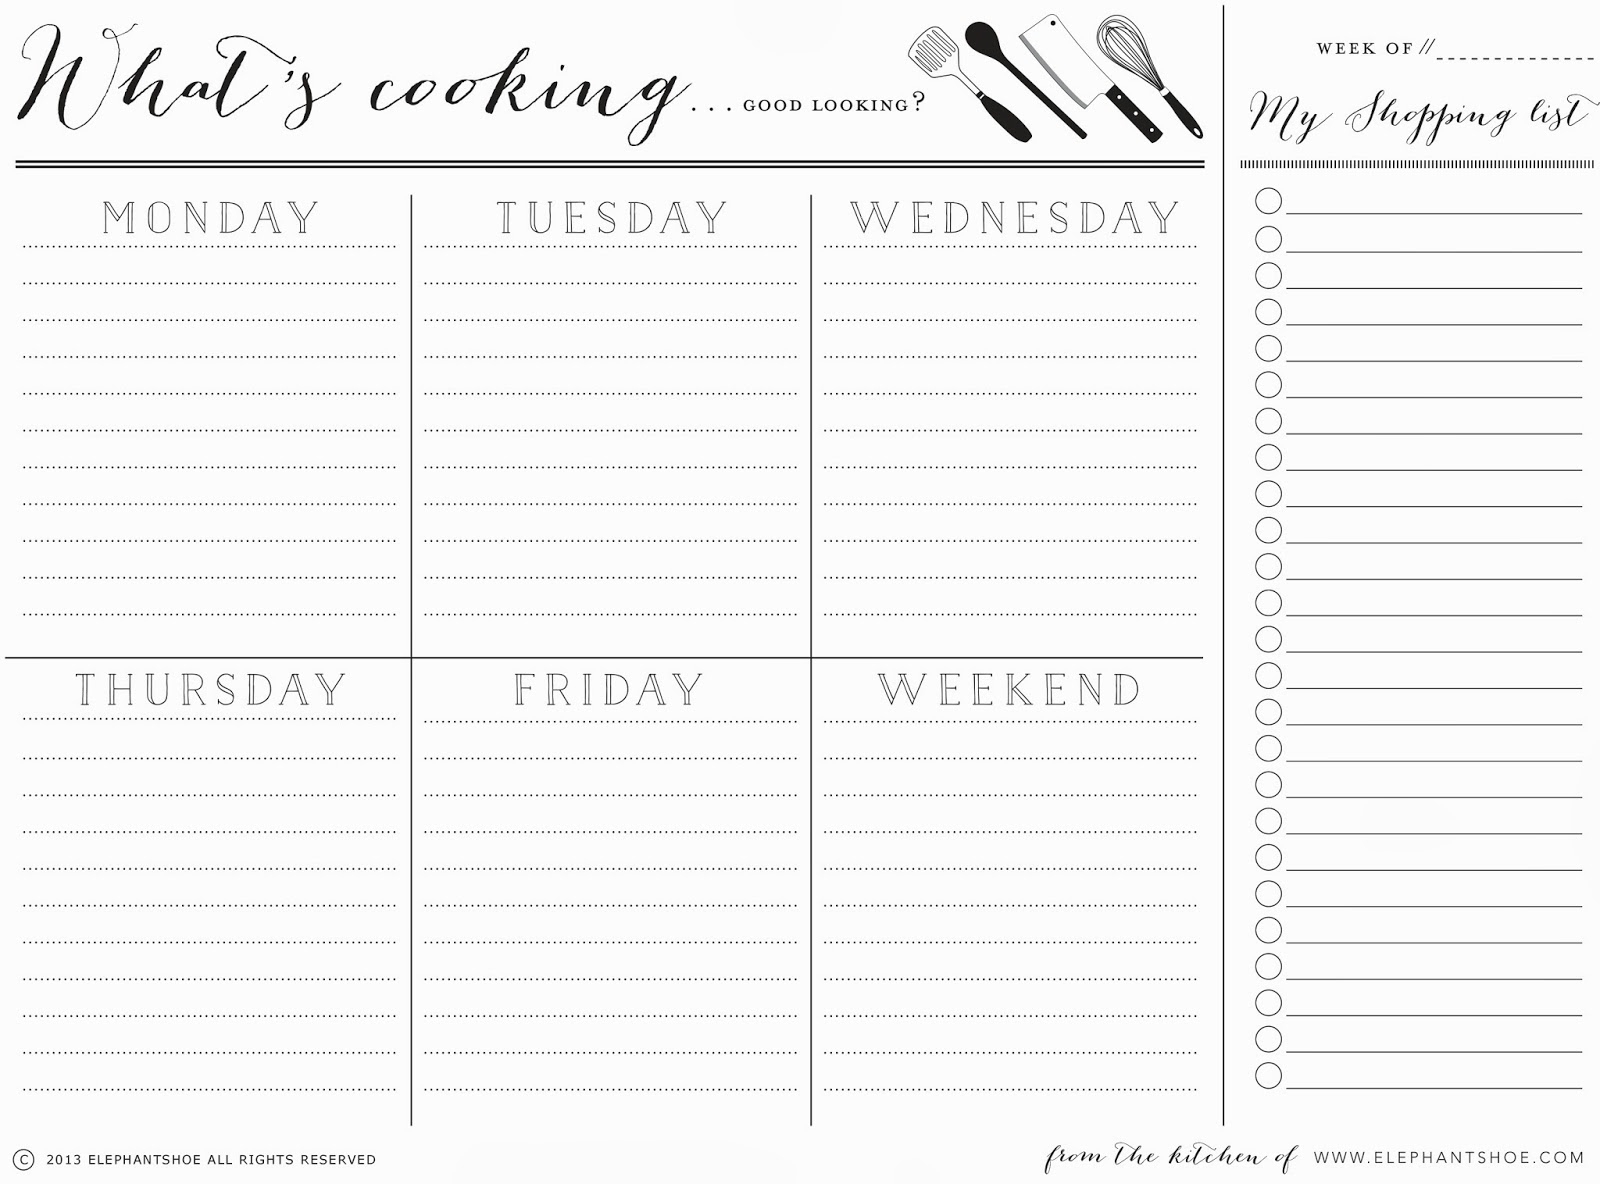 Day Trip Planner Template Meal Excel Free Schedule Ekly | Smorad throughout 7 Day Meal Planner Template